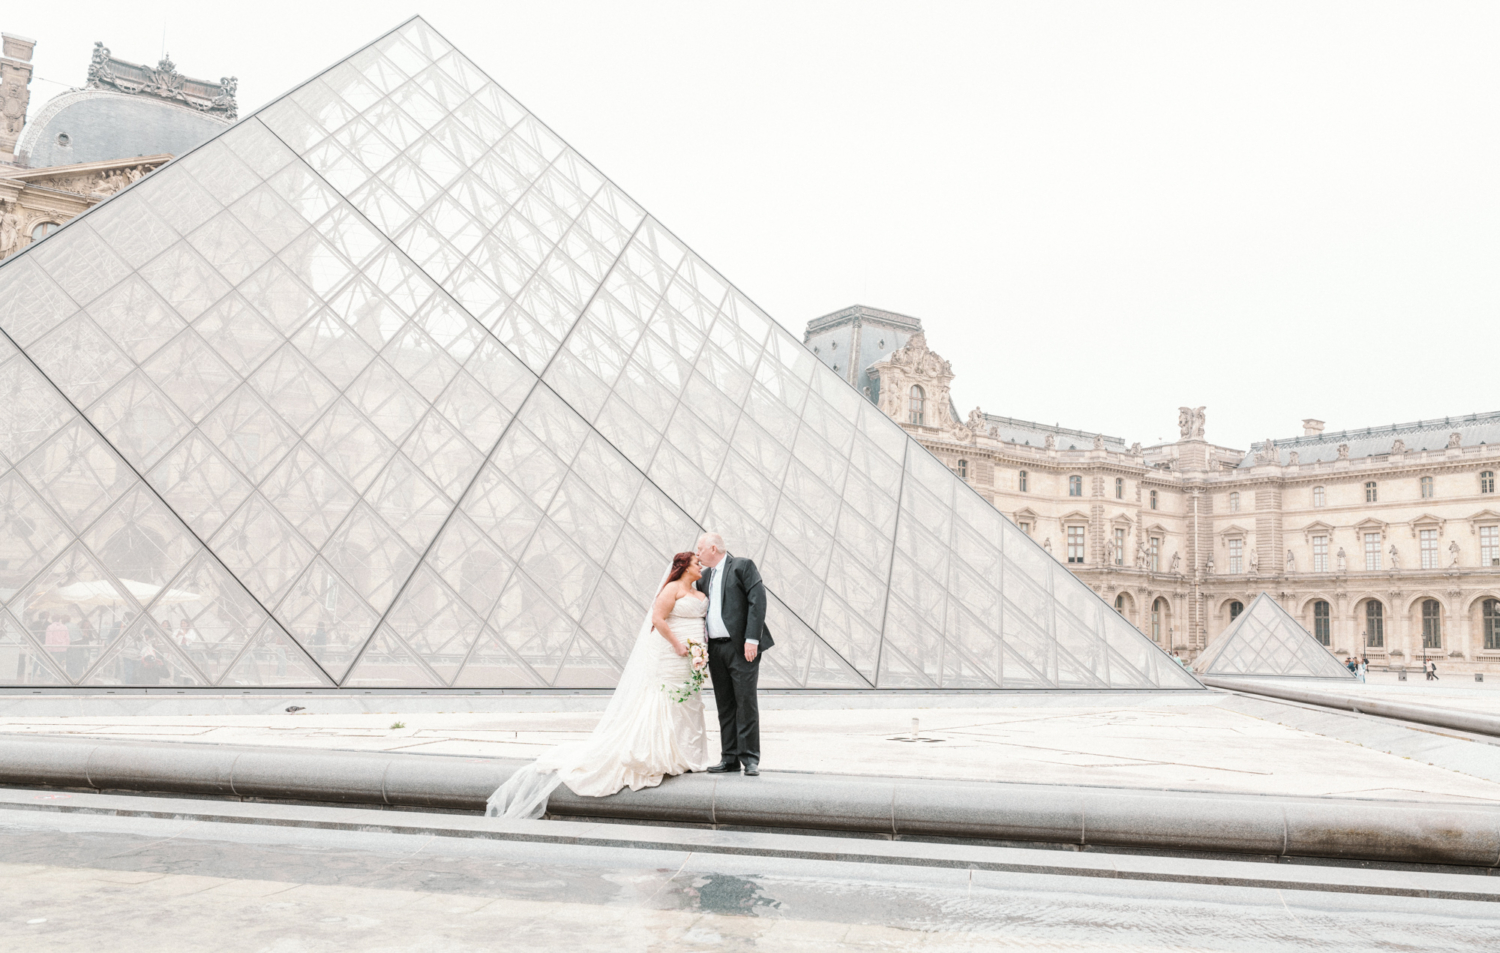 groom kisses bride's forehead at glass pyramid in paris